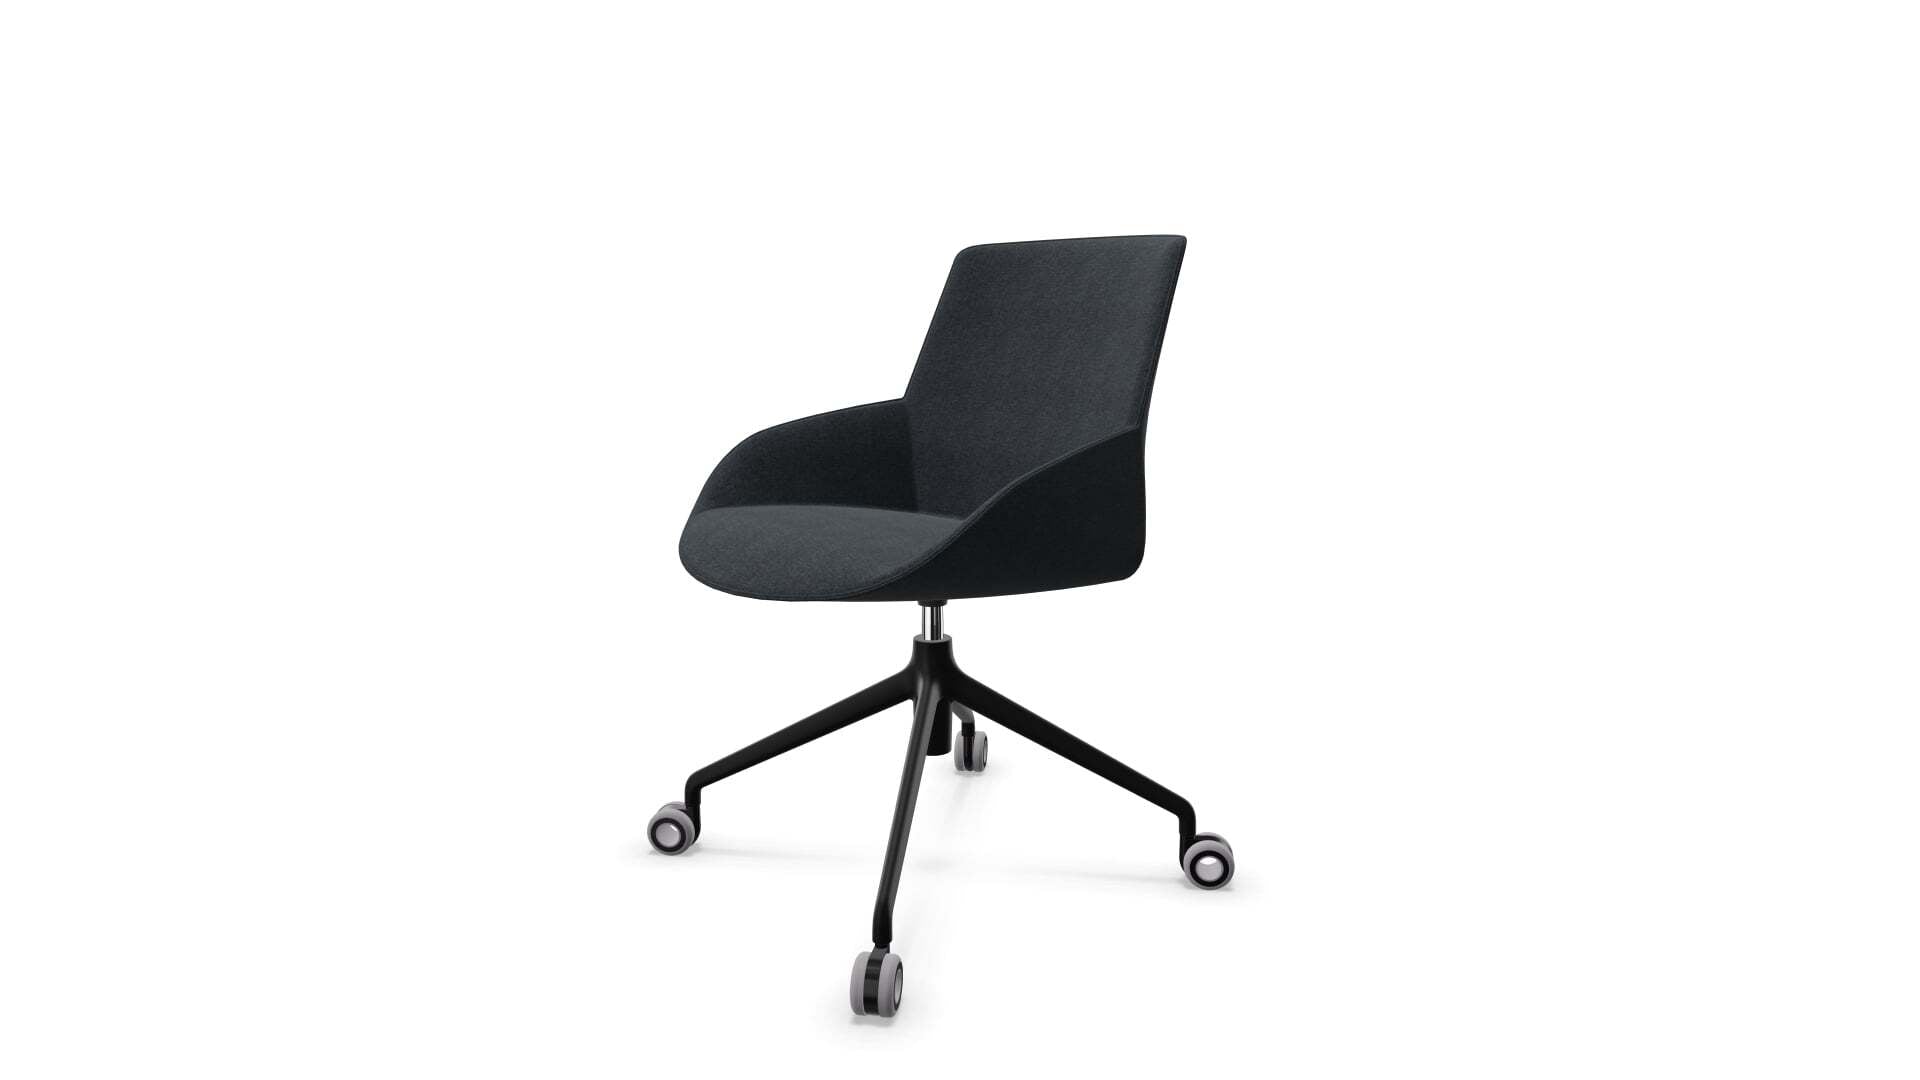 Noom Series 30 Chair with 4-Star Base Home, Office, Garden online marketplace